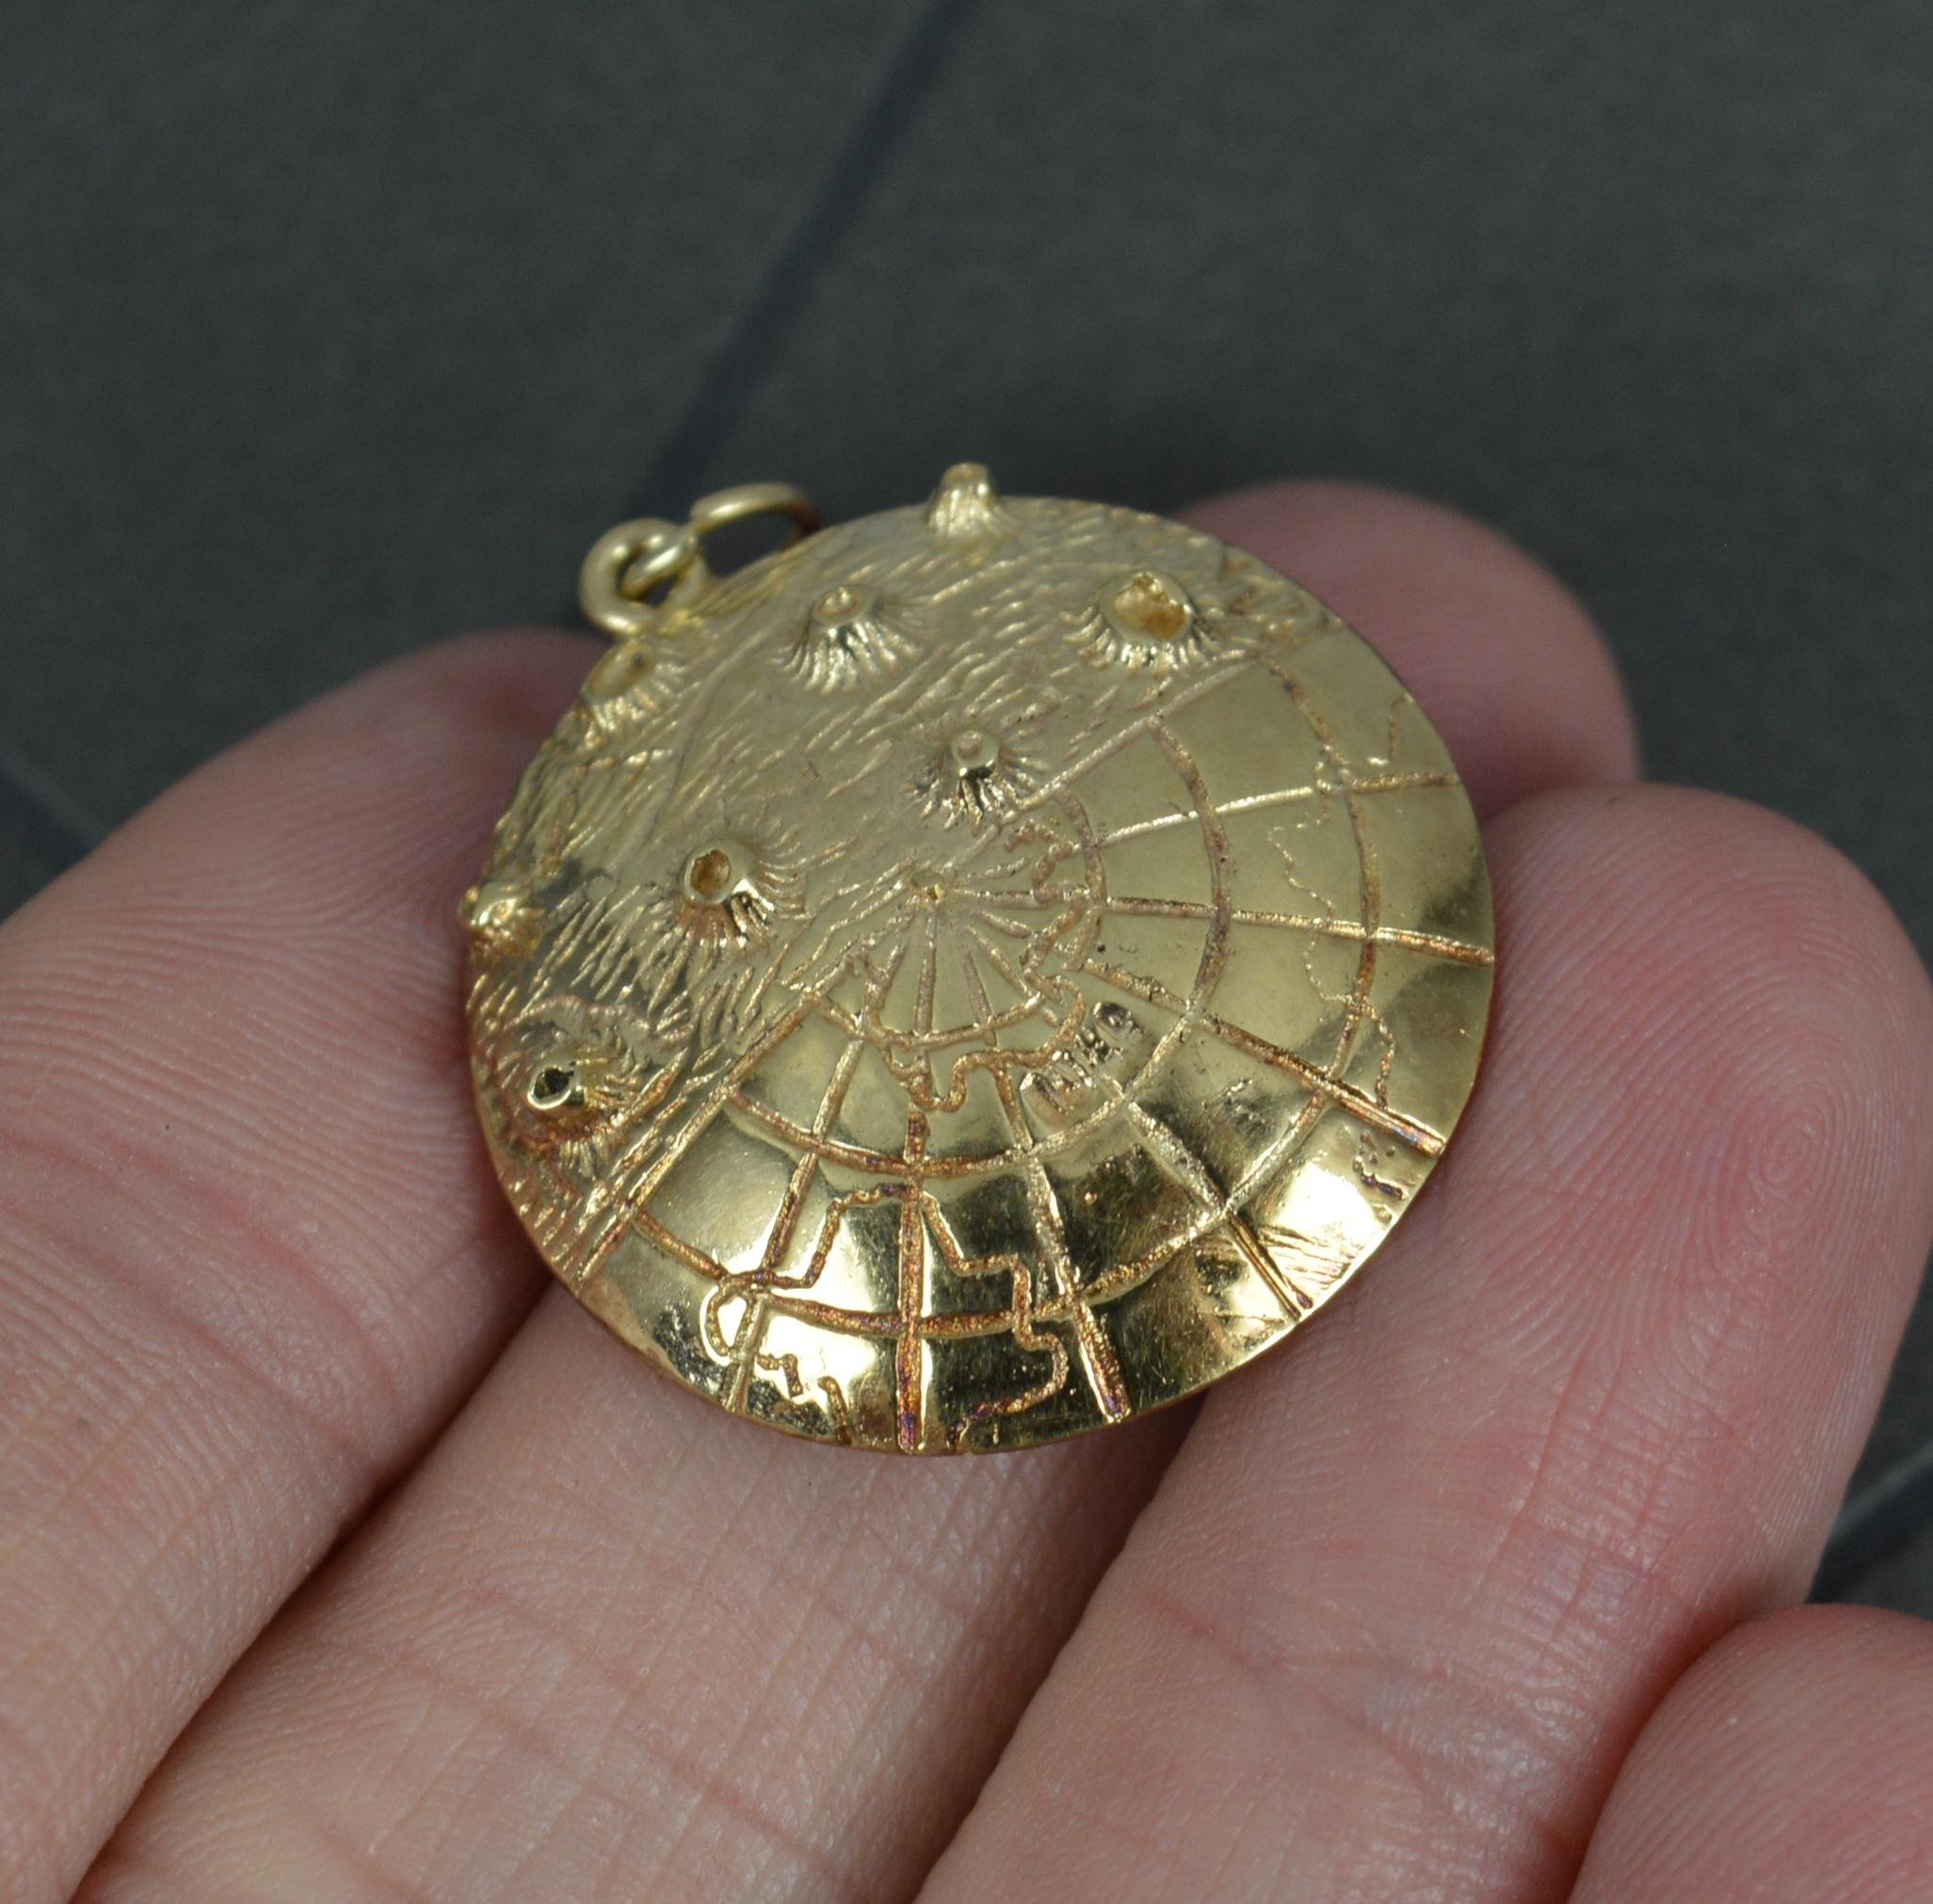 Retro Rare 1969 1st Man on the Moon Solid 9 Carat Gold Pendant For Sale